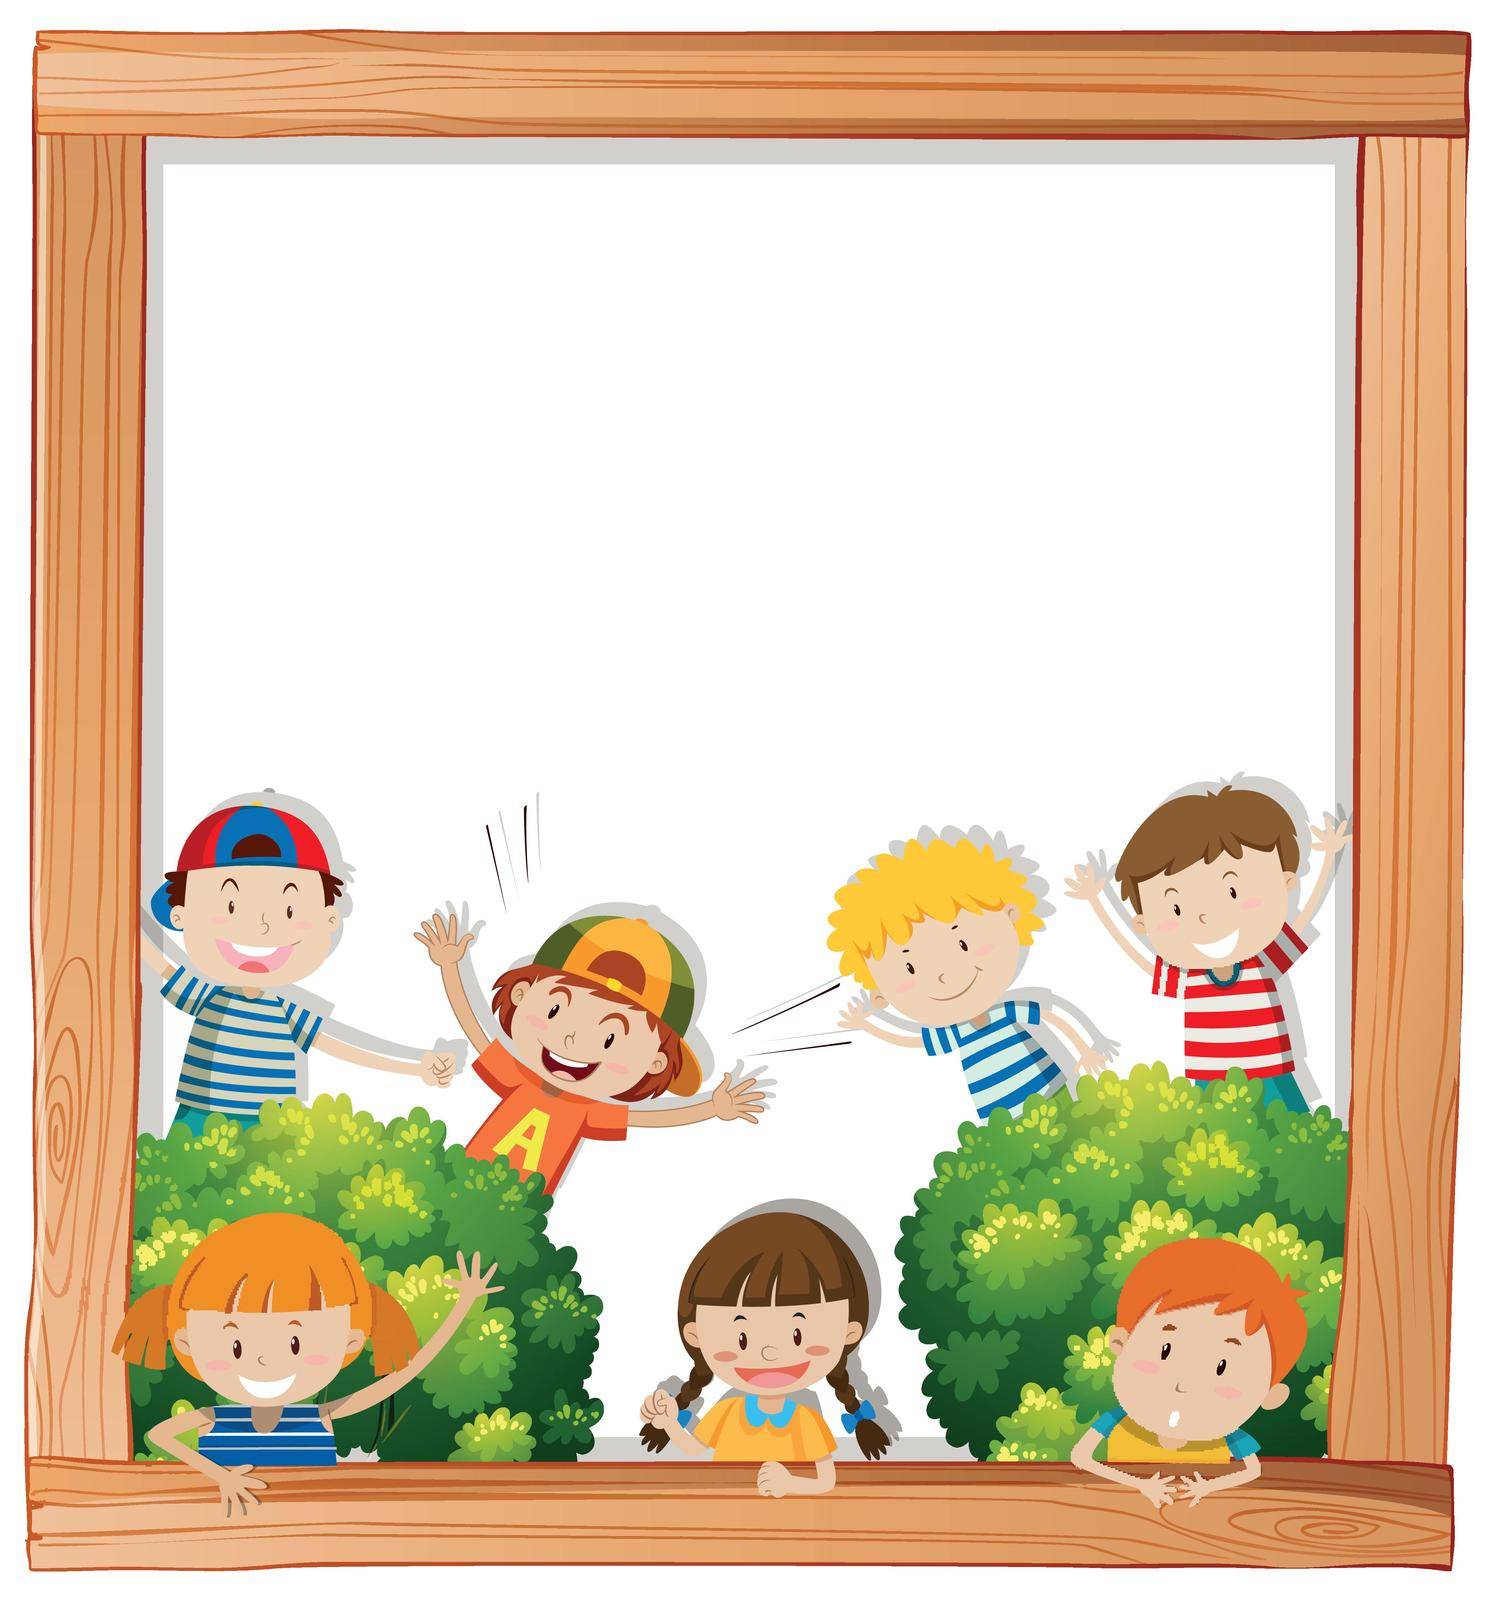 A blank board with children illustration